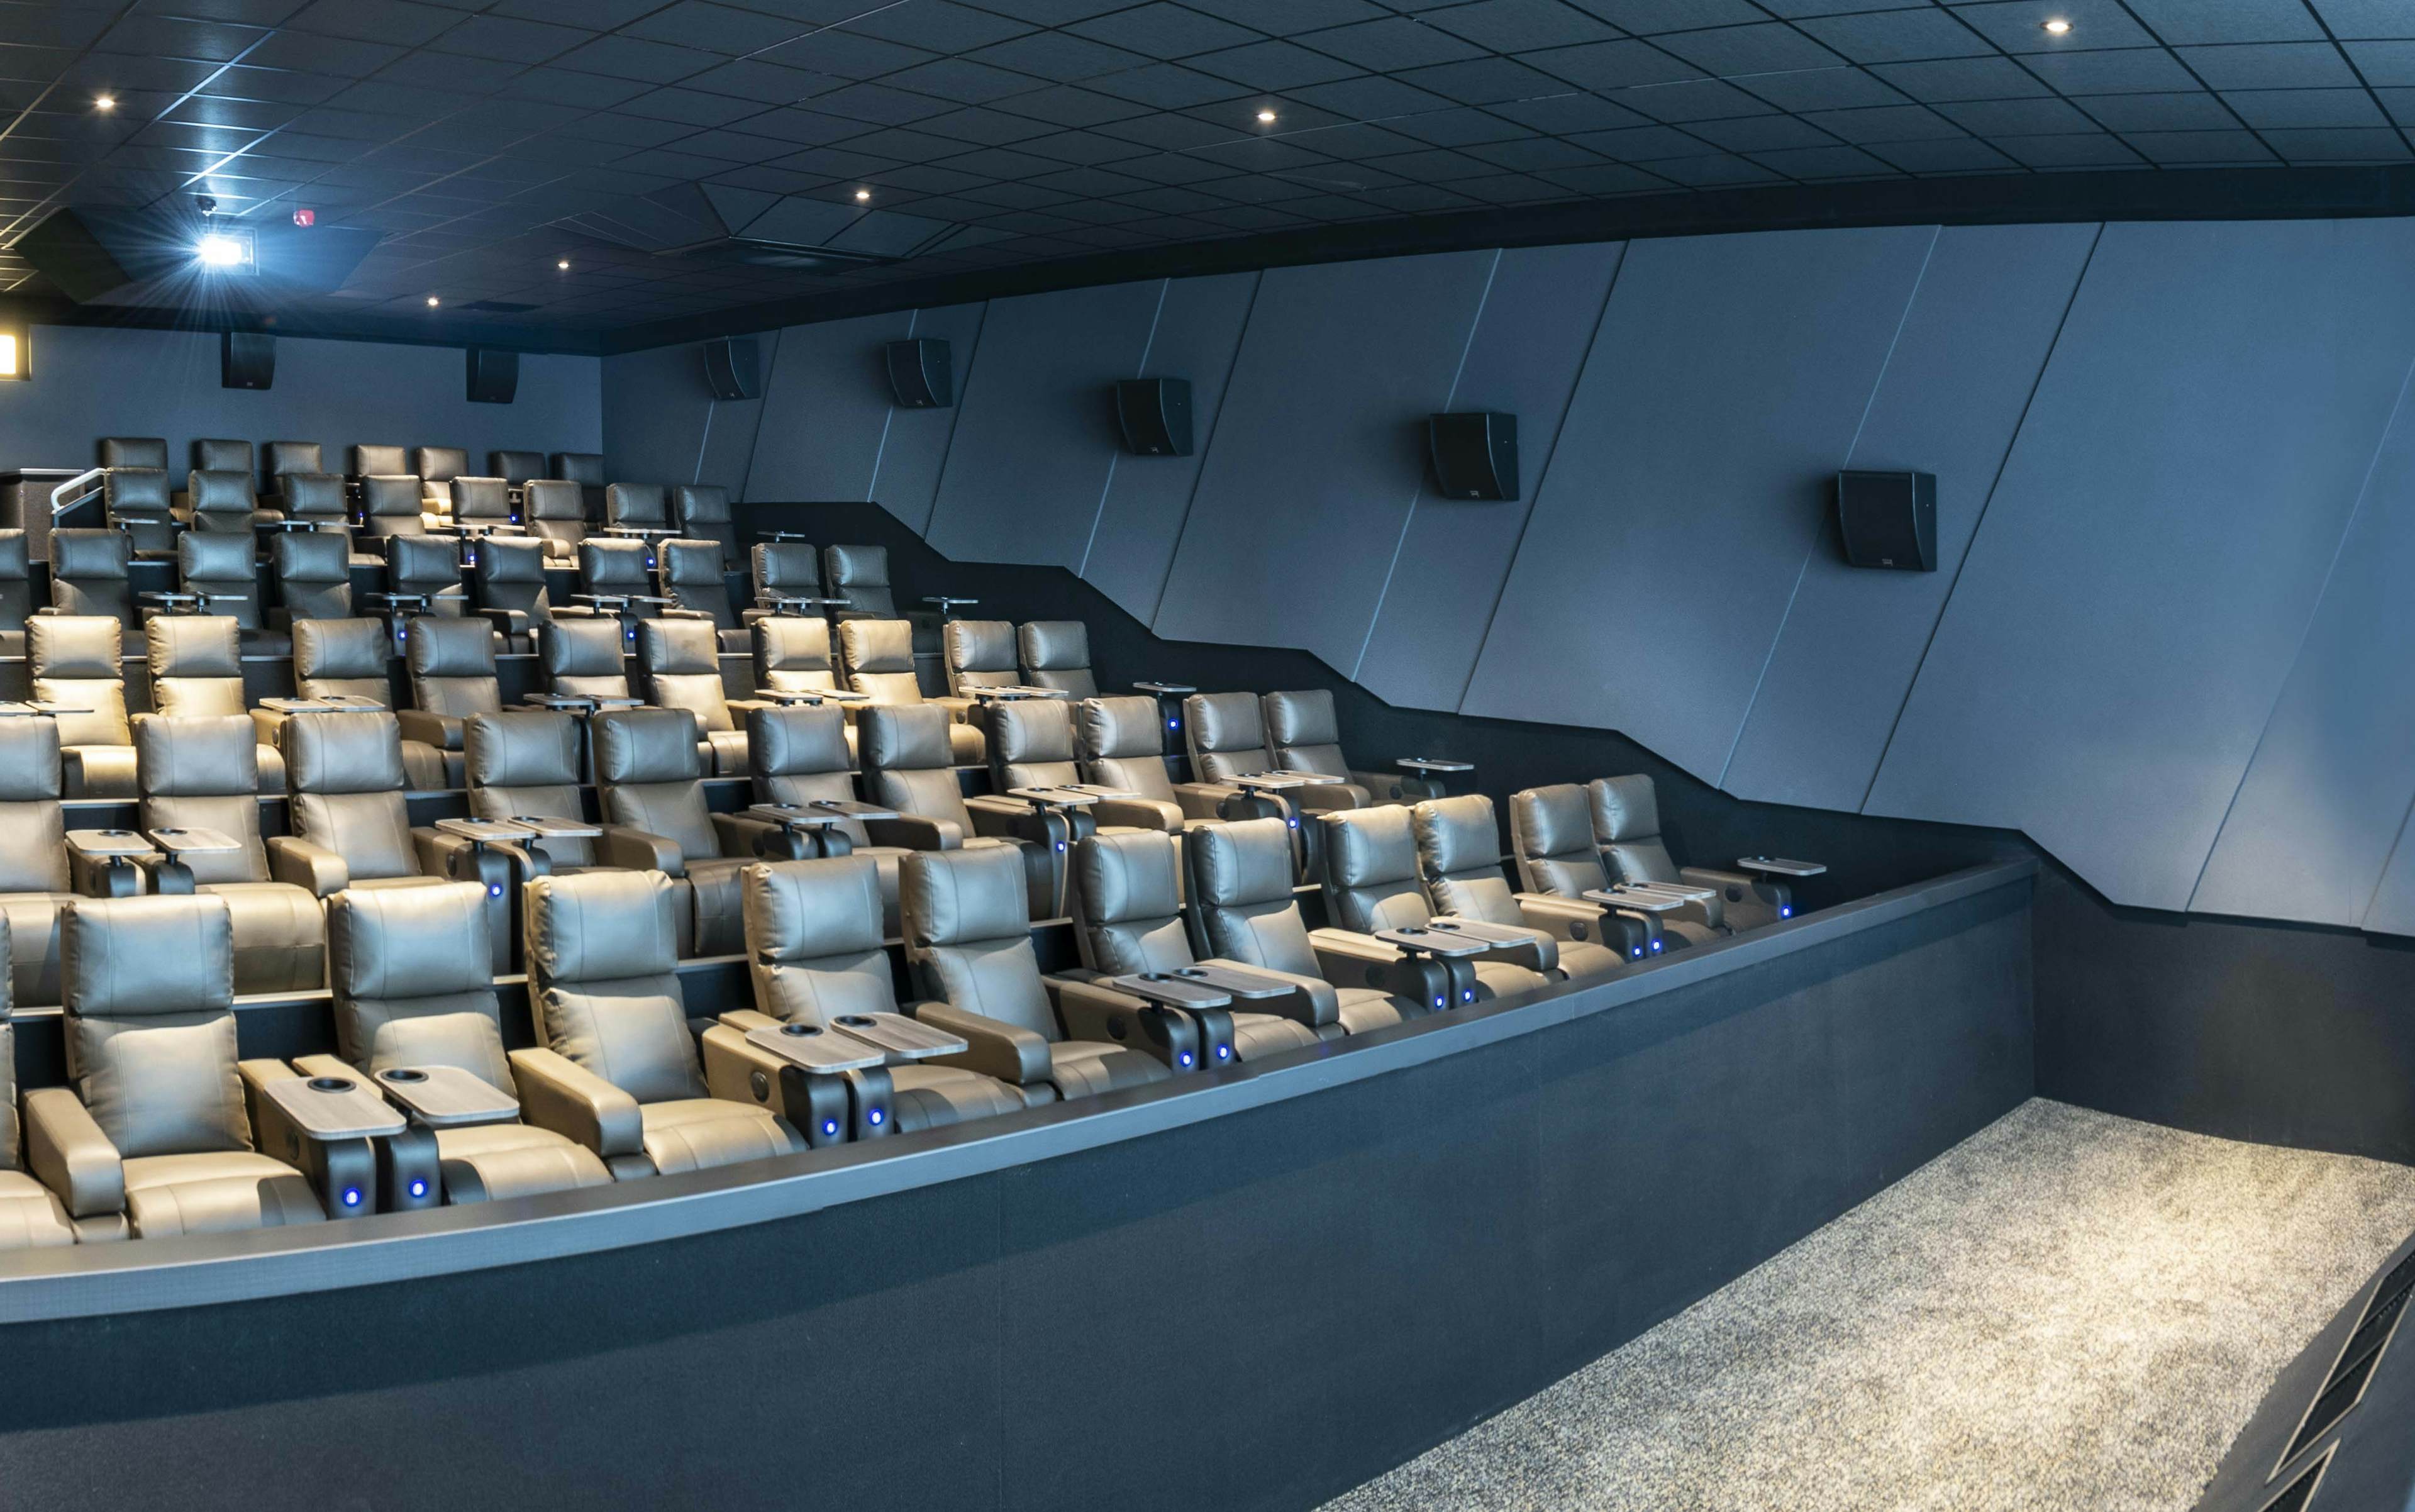 ODEON Luxe Sheffield - Screens image 1